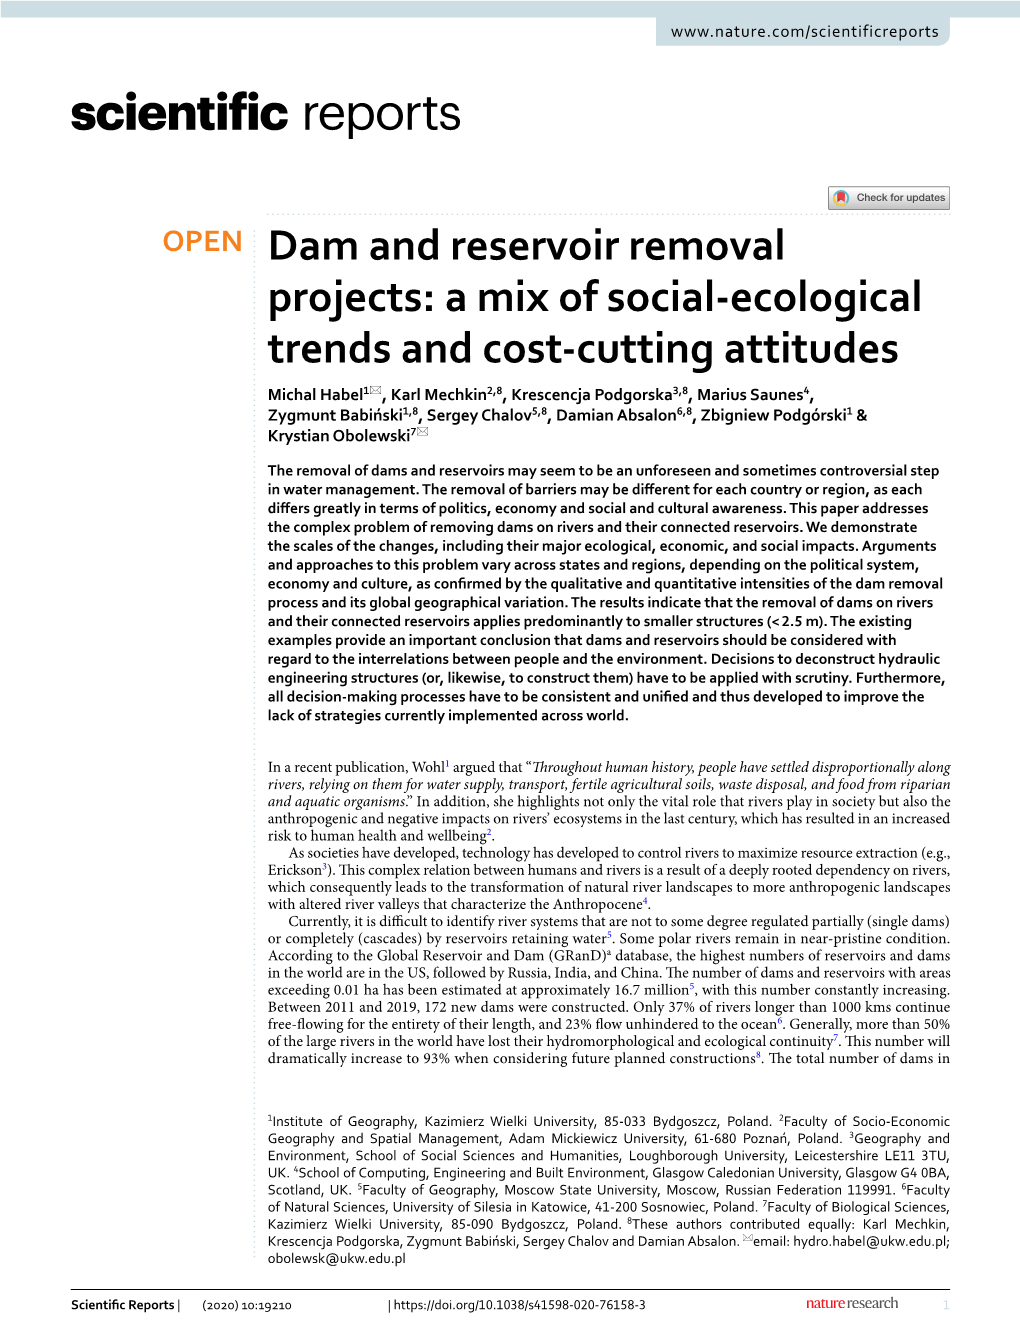 Dam and Reservoir Removal Projects